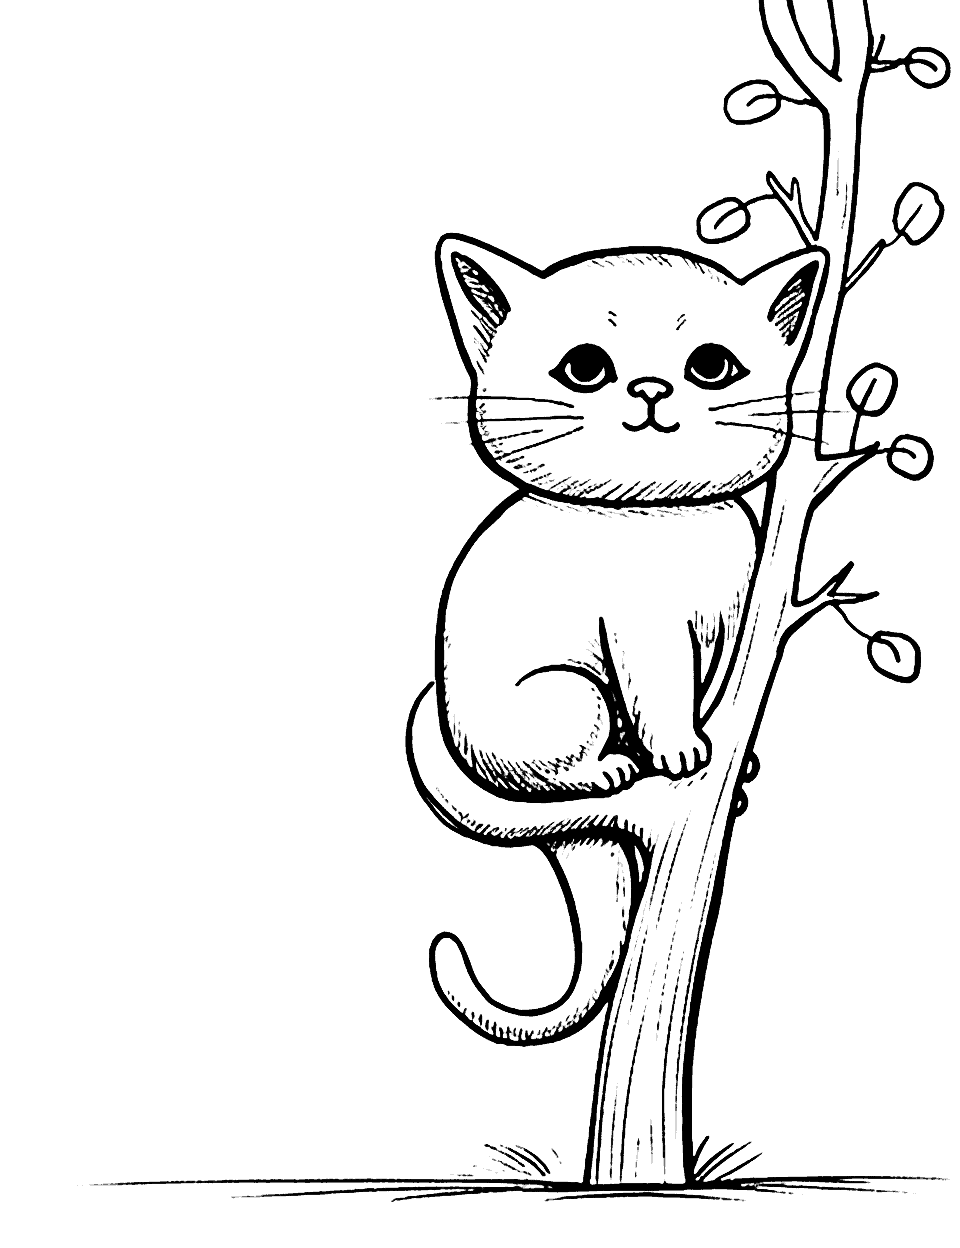 Baby Cat's First Climb Cat Coloring Page - A baby cat climbing a tree for the first time.